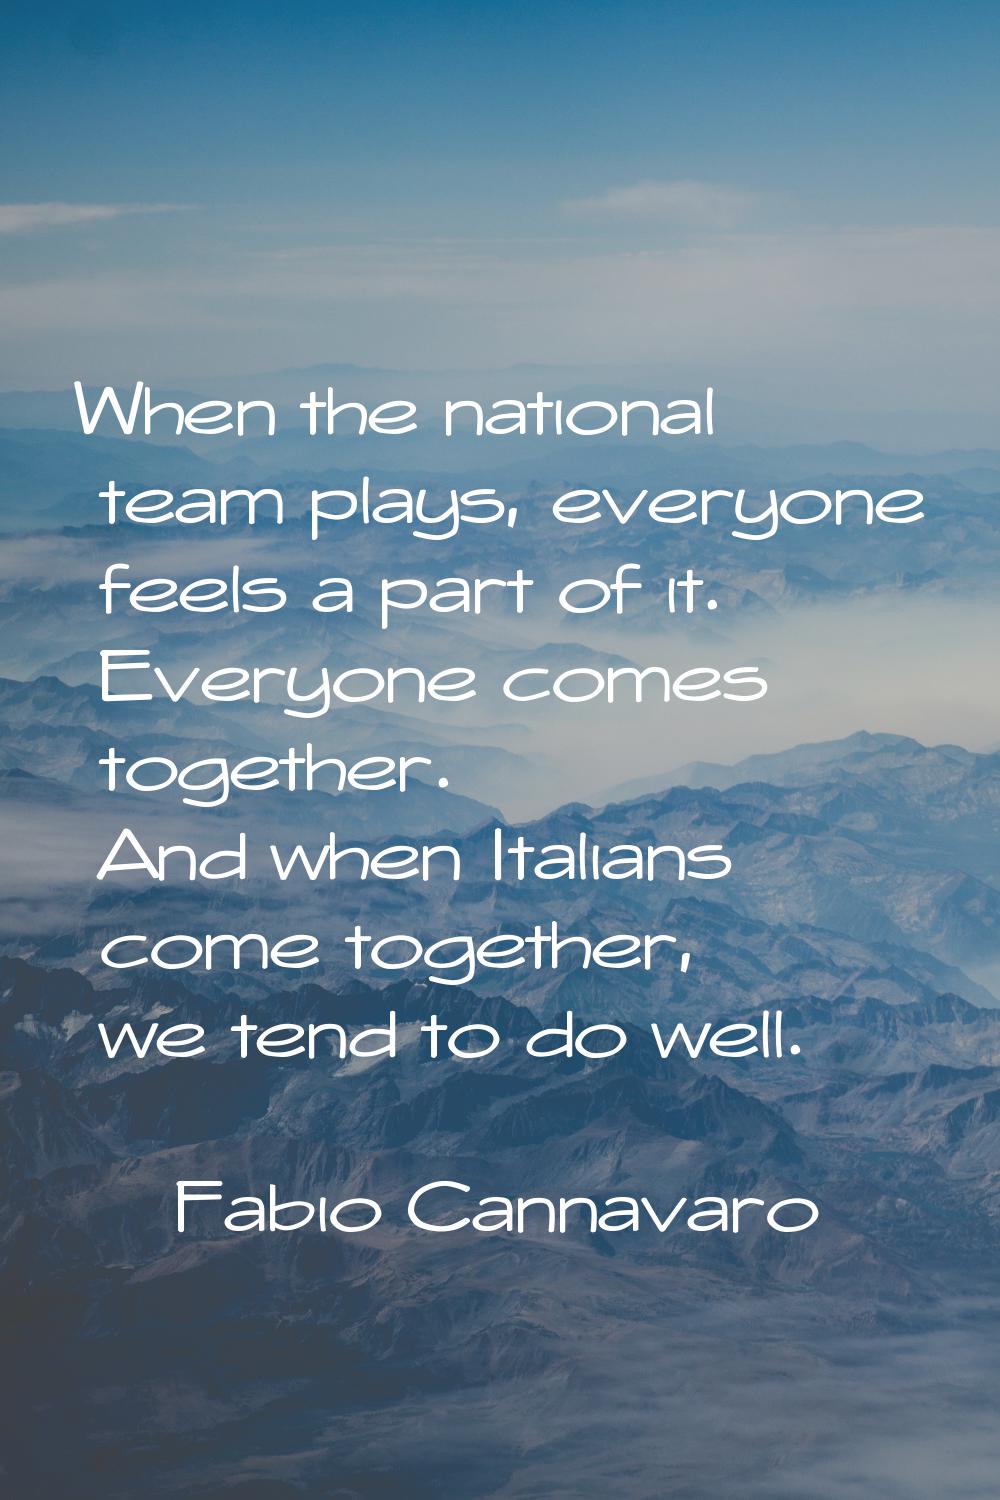 When the national team plays, everyone feels a part of it. Everyone comes together. And when Italia